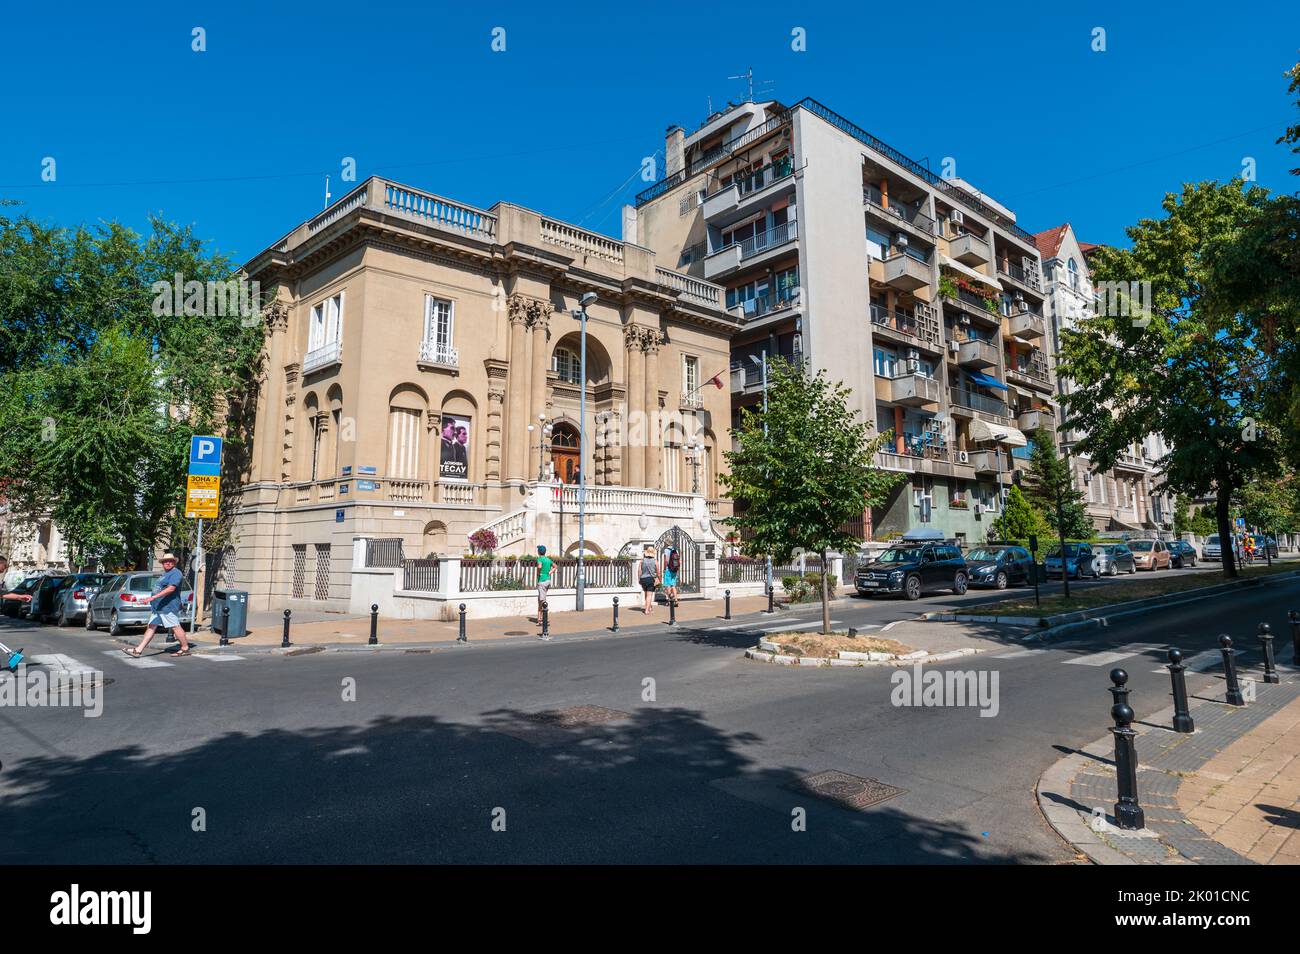 Belgrade, Serbia - July 25, 2022: The Nikola Tesla Museum is a science museum located in the central area of Belgrade, Serbia Stock Photo